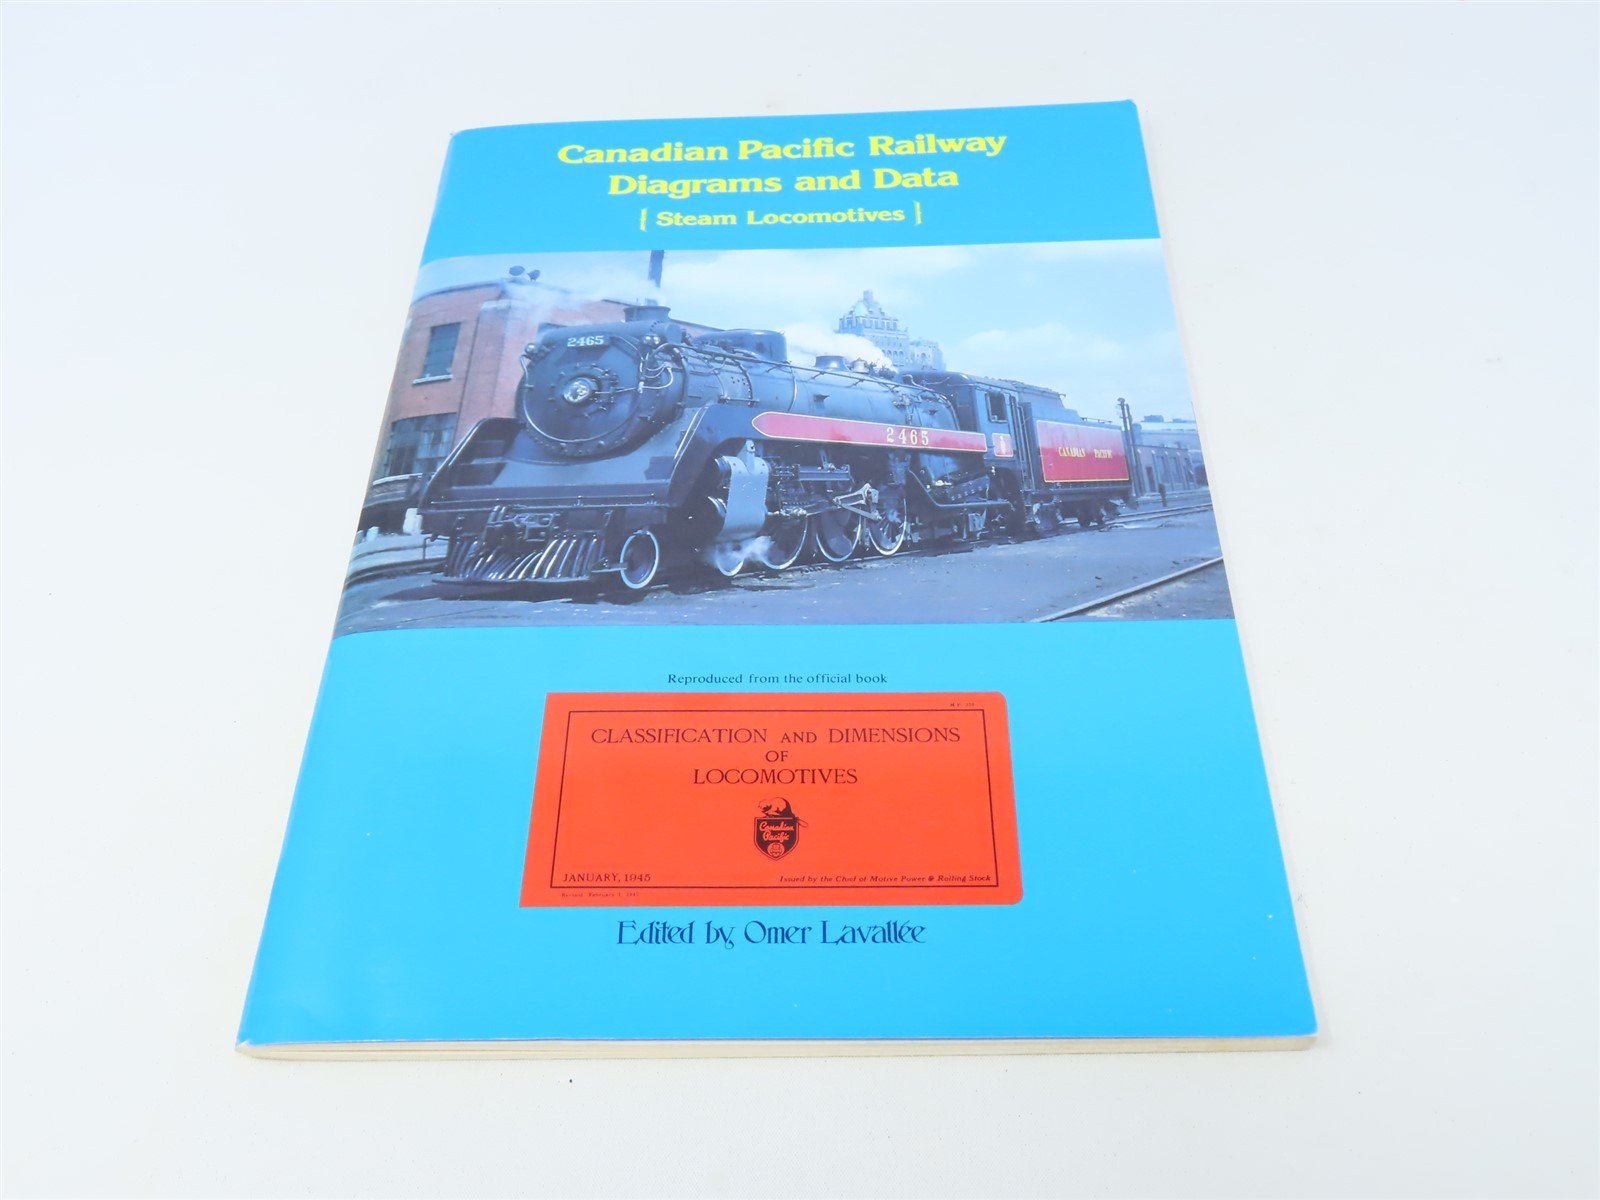 Canadian Pacific Railway Diagrams & Data, Edited by Omar Lavallee ©1985 SC Book